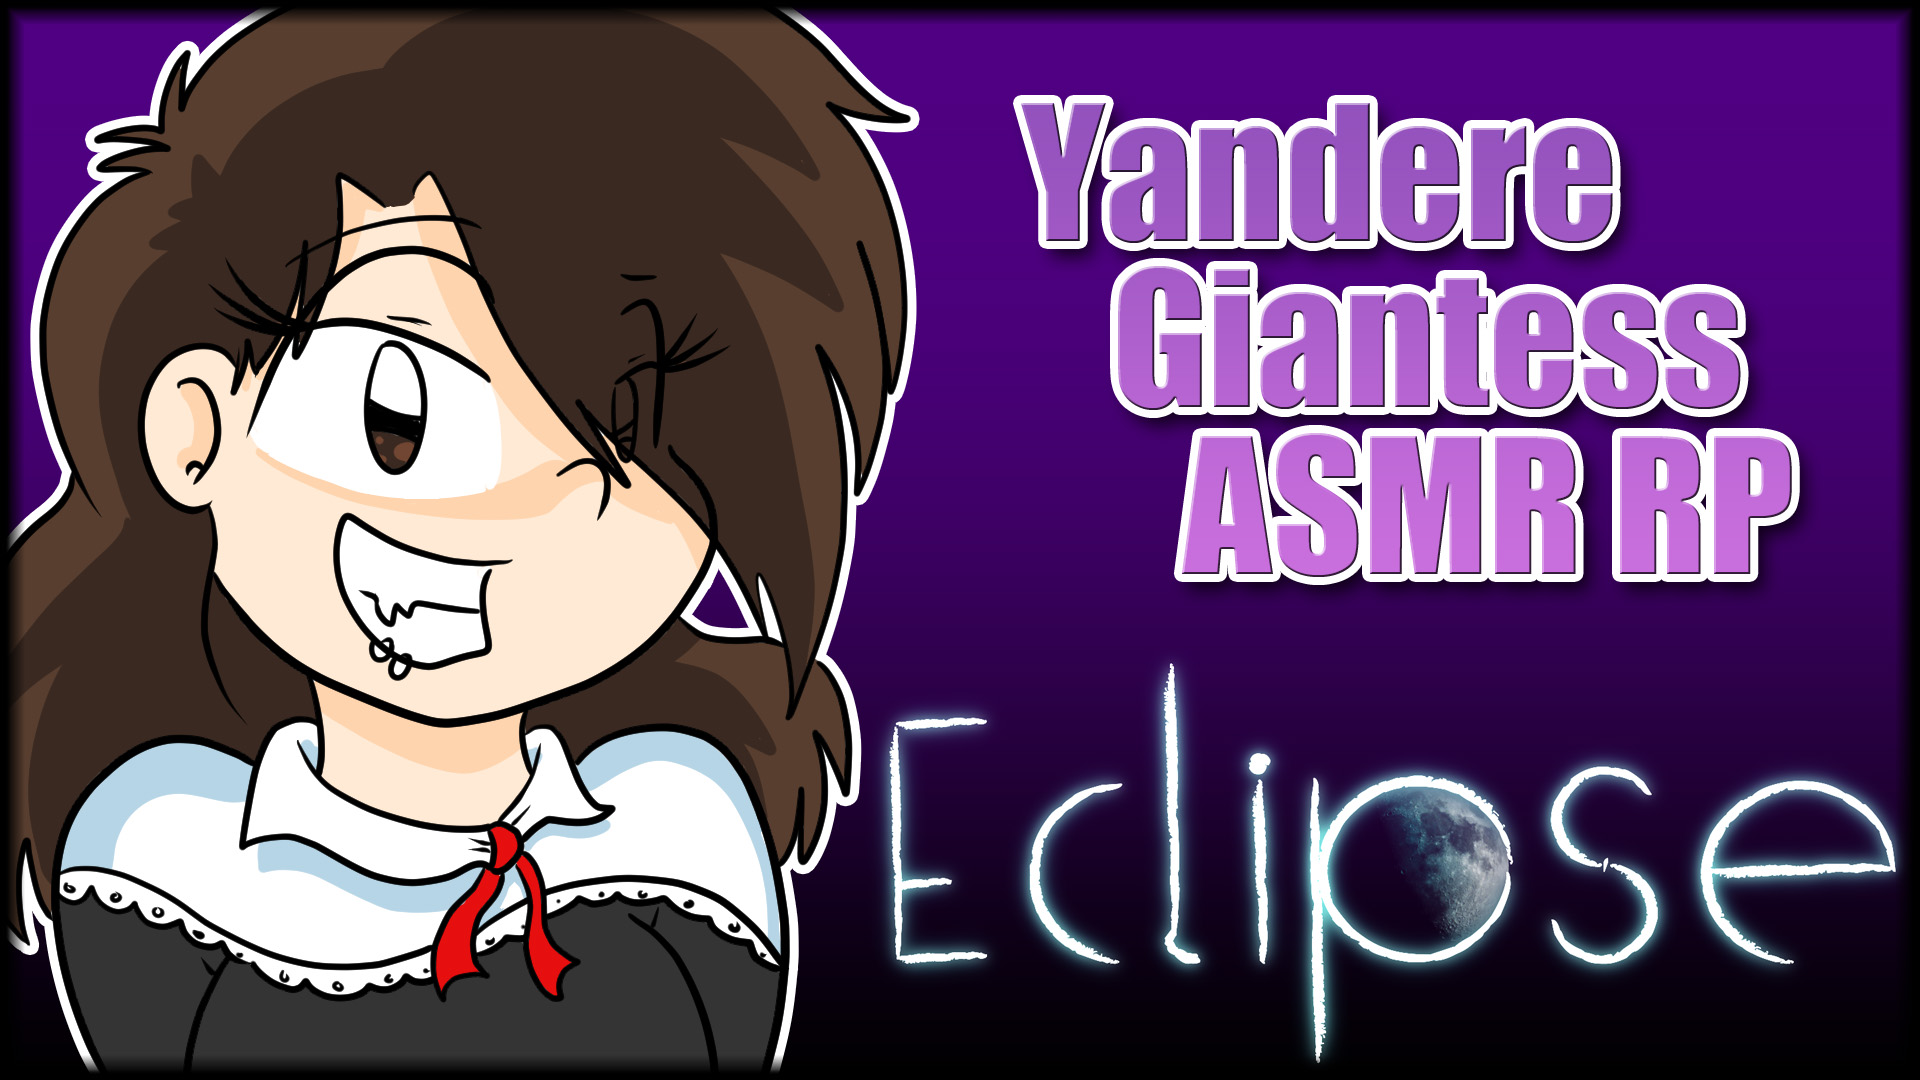 Canadian Giantess - ChibiChan on X: Part two of #Giantess Eclipse's Yandere  story is coming up very soon! Get caught up on the original here for free!  Just hop onto her channel